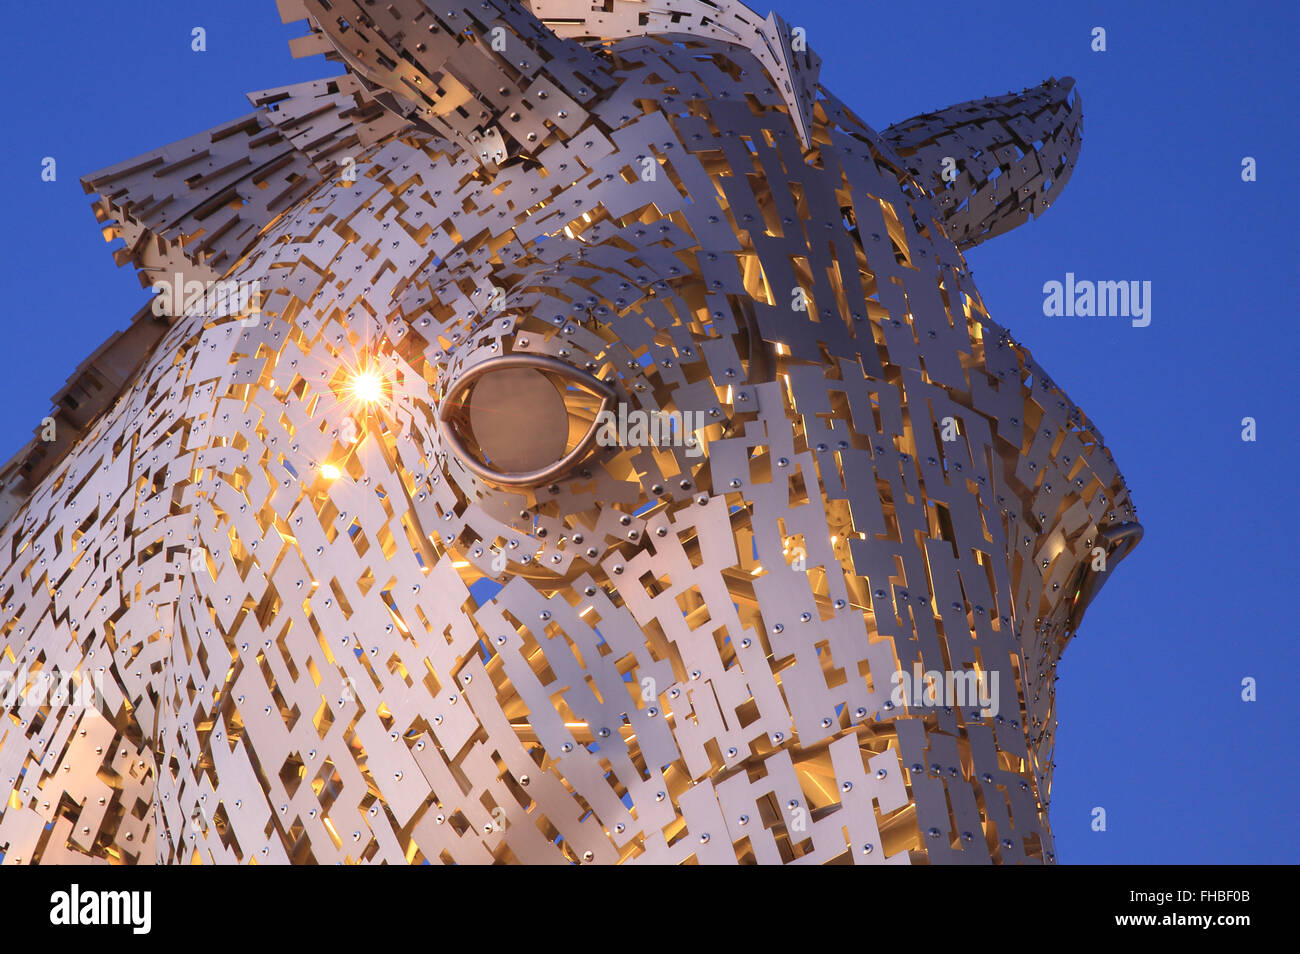 Detail of the eye of one of the Kelpies, illuminated at dusk, the world's largest horse sculptures, in Falkirk, Scotland, UK Stock Photo